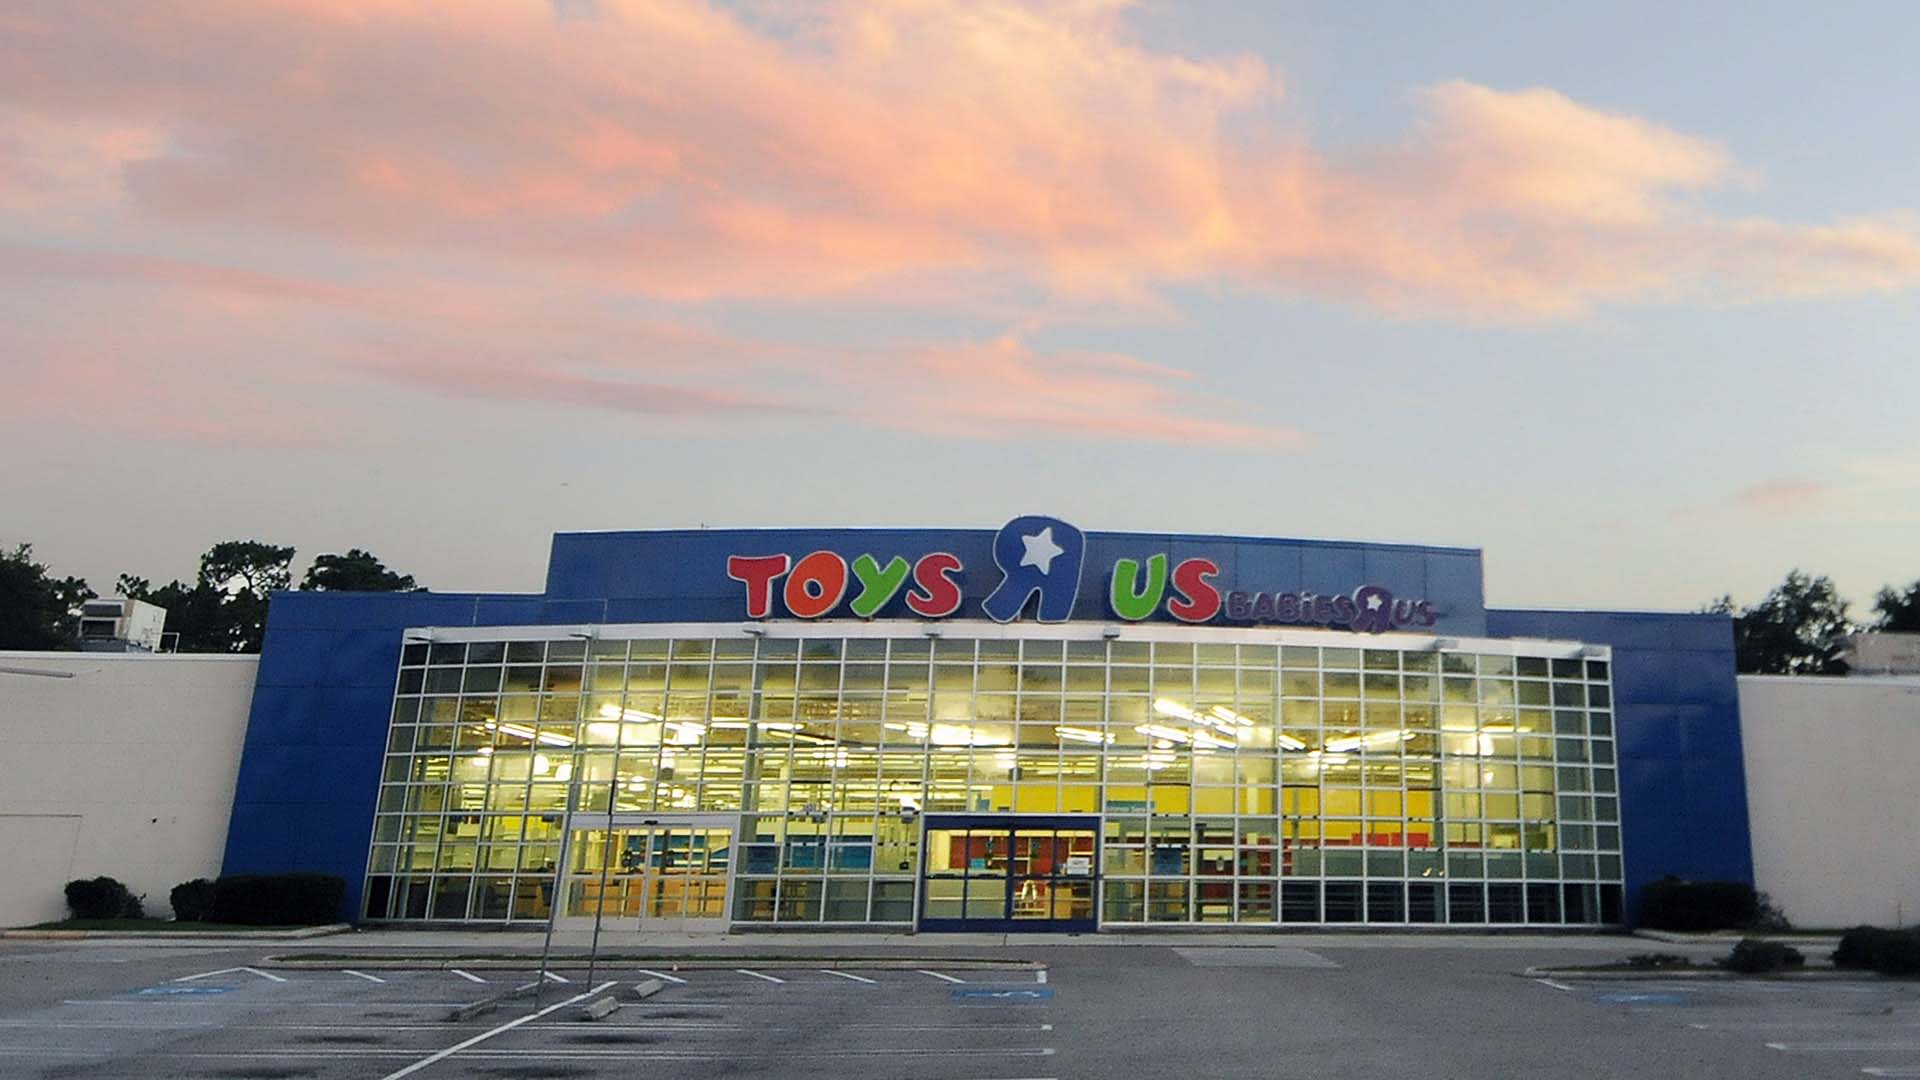 Toys 'R' Us Just Announced Some Very Big Plans, and There's an Important Lesson You'll Want to Remember